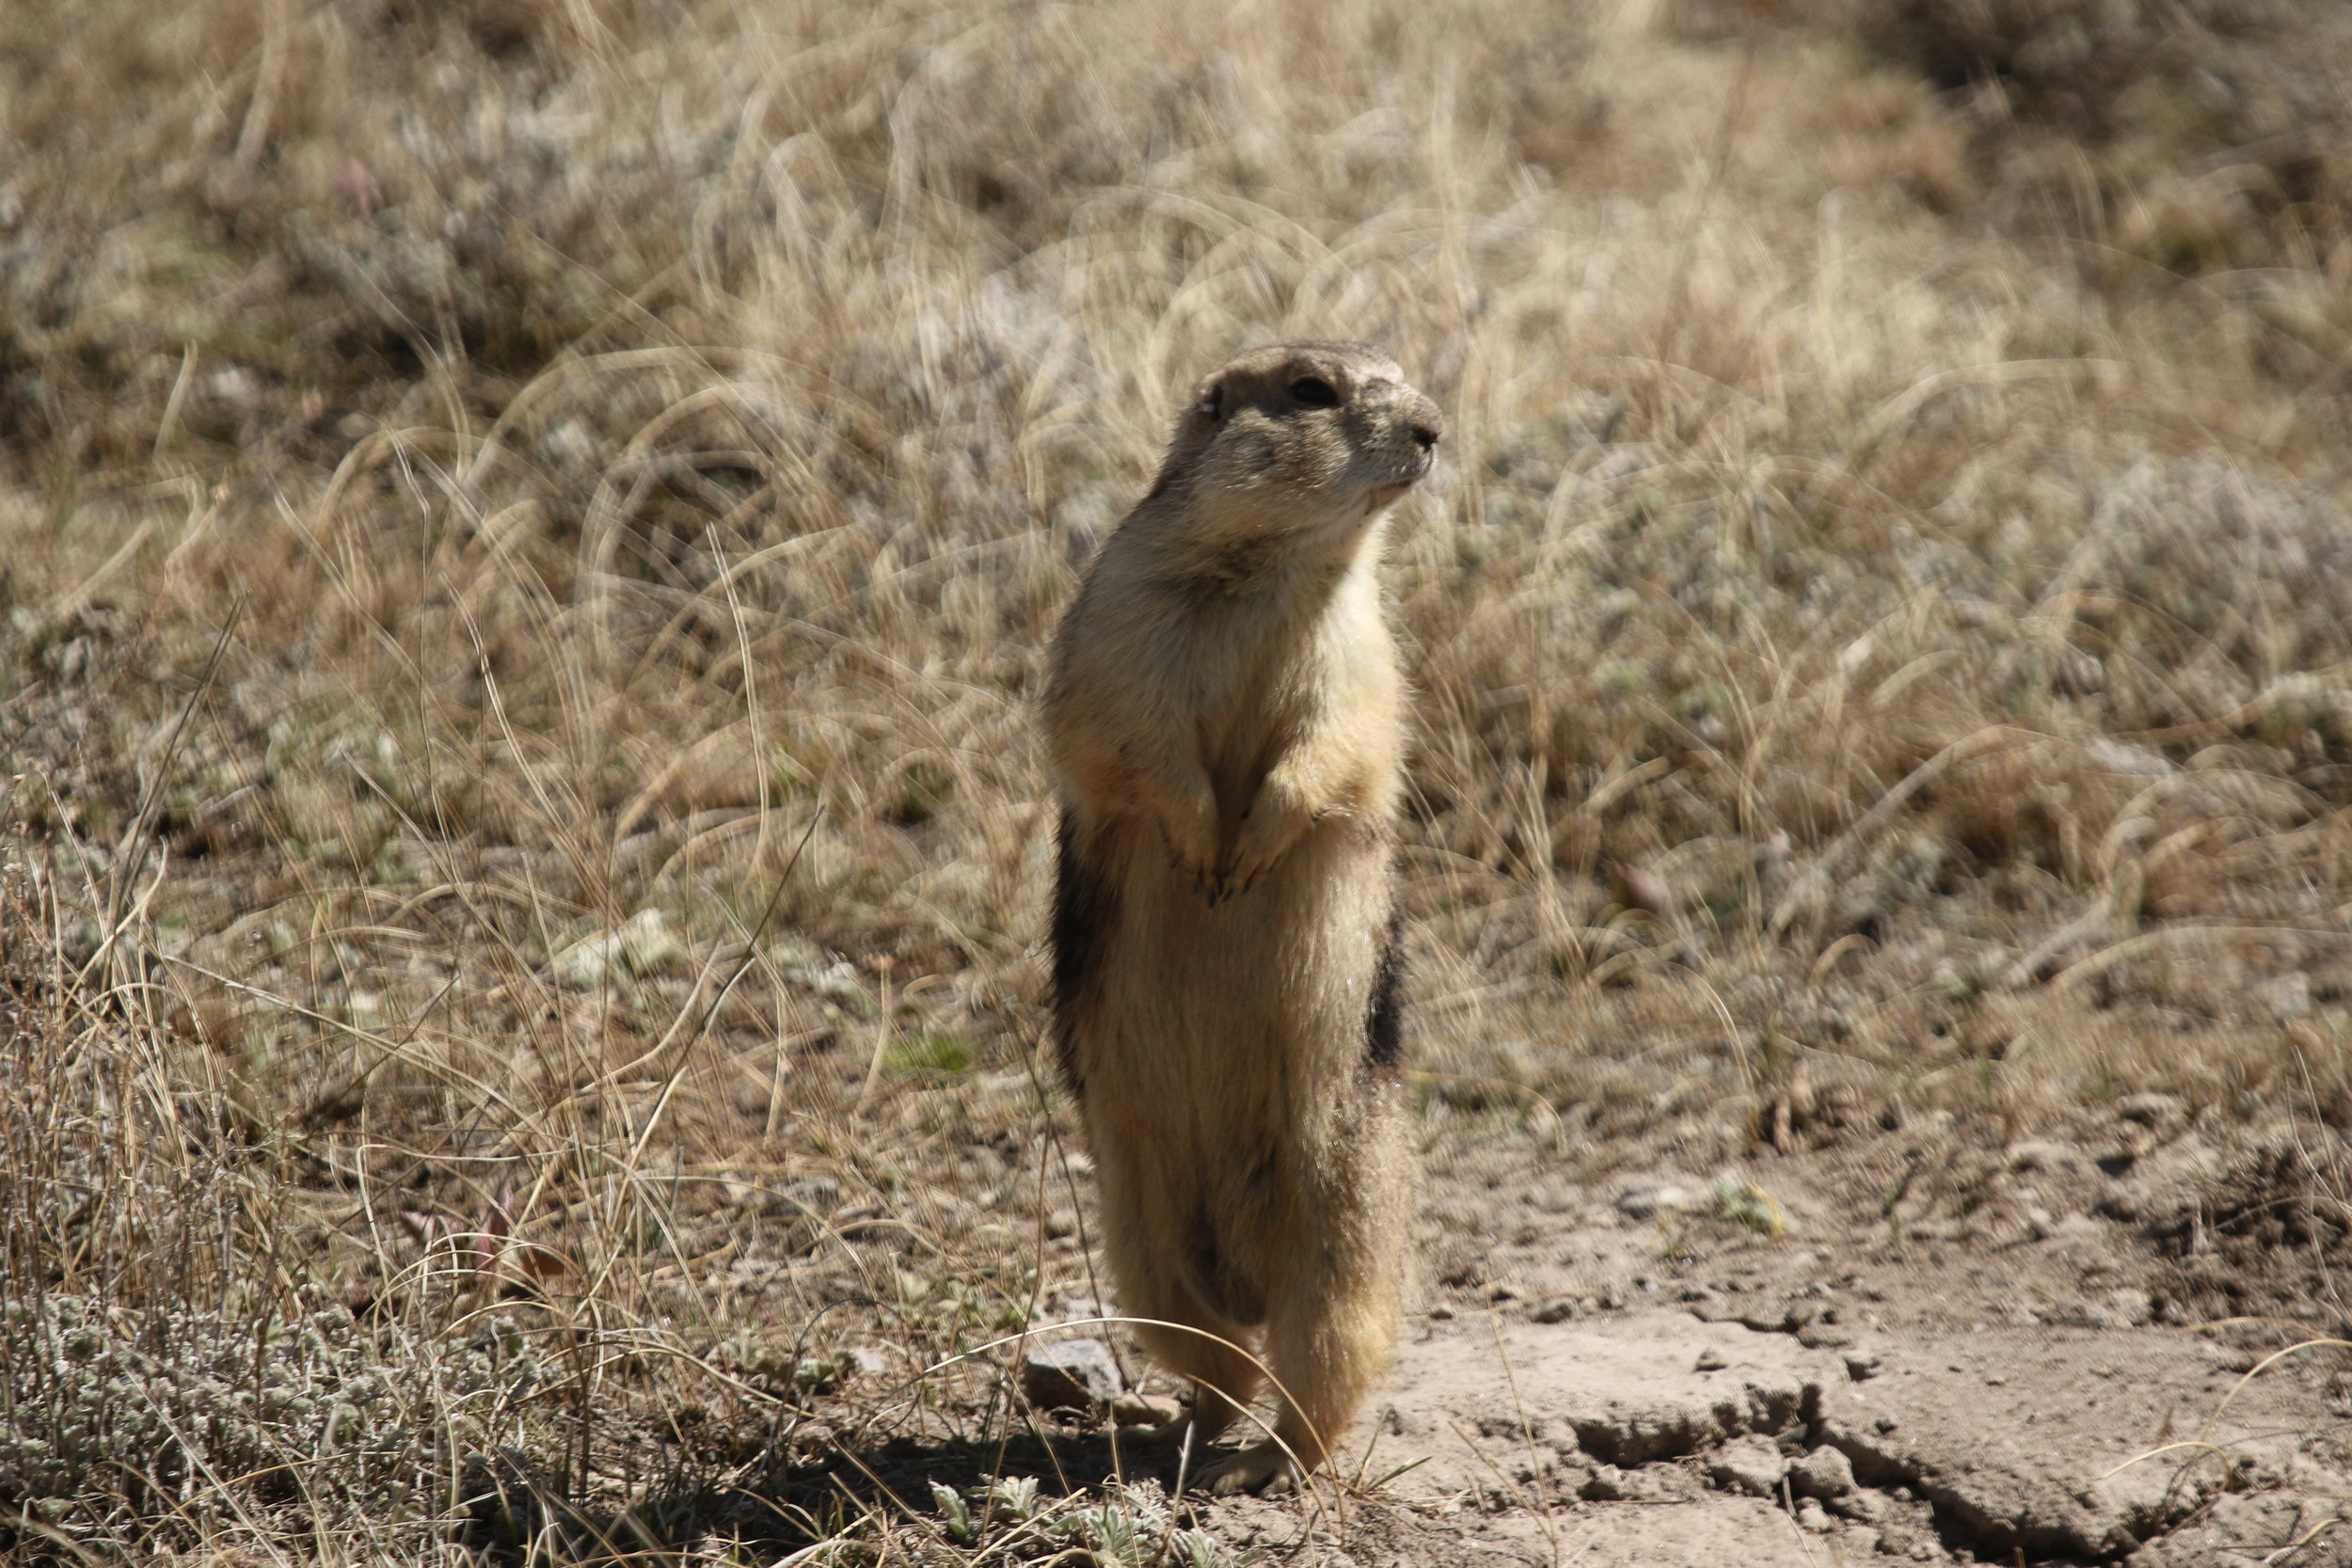  Standing at its tallest allows a prairie dog to scan farther.  ©MRR 2017  